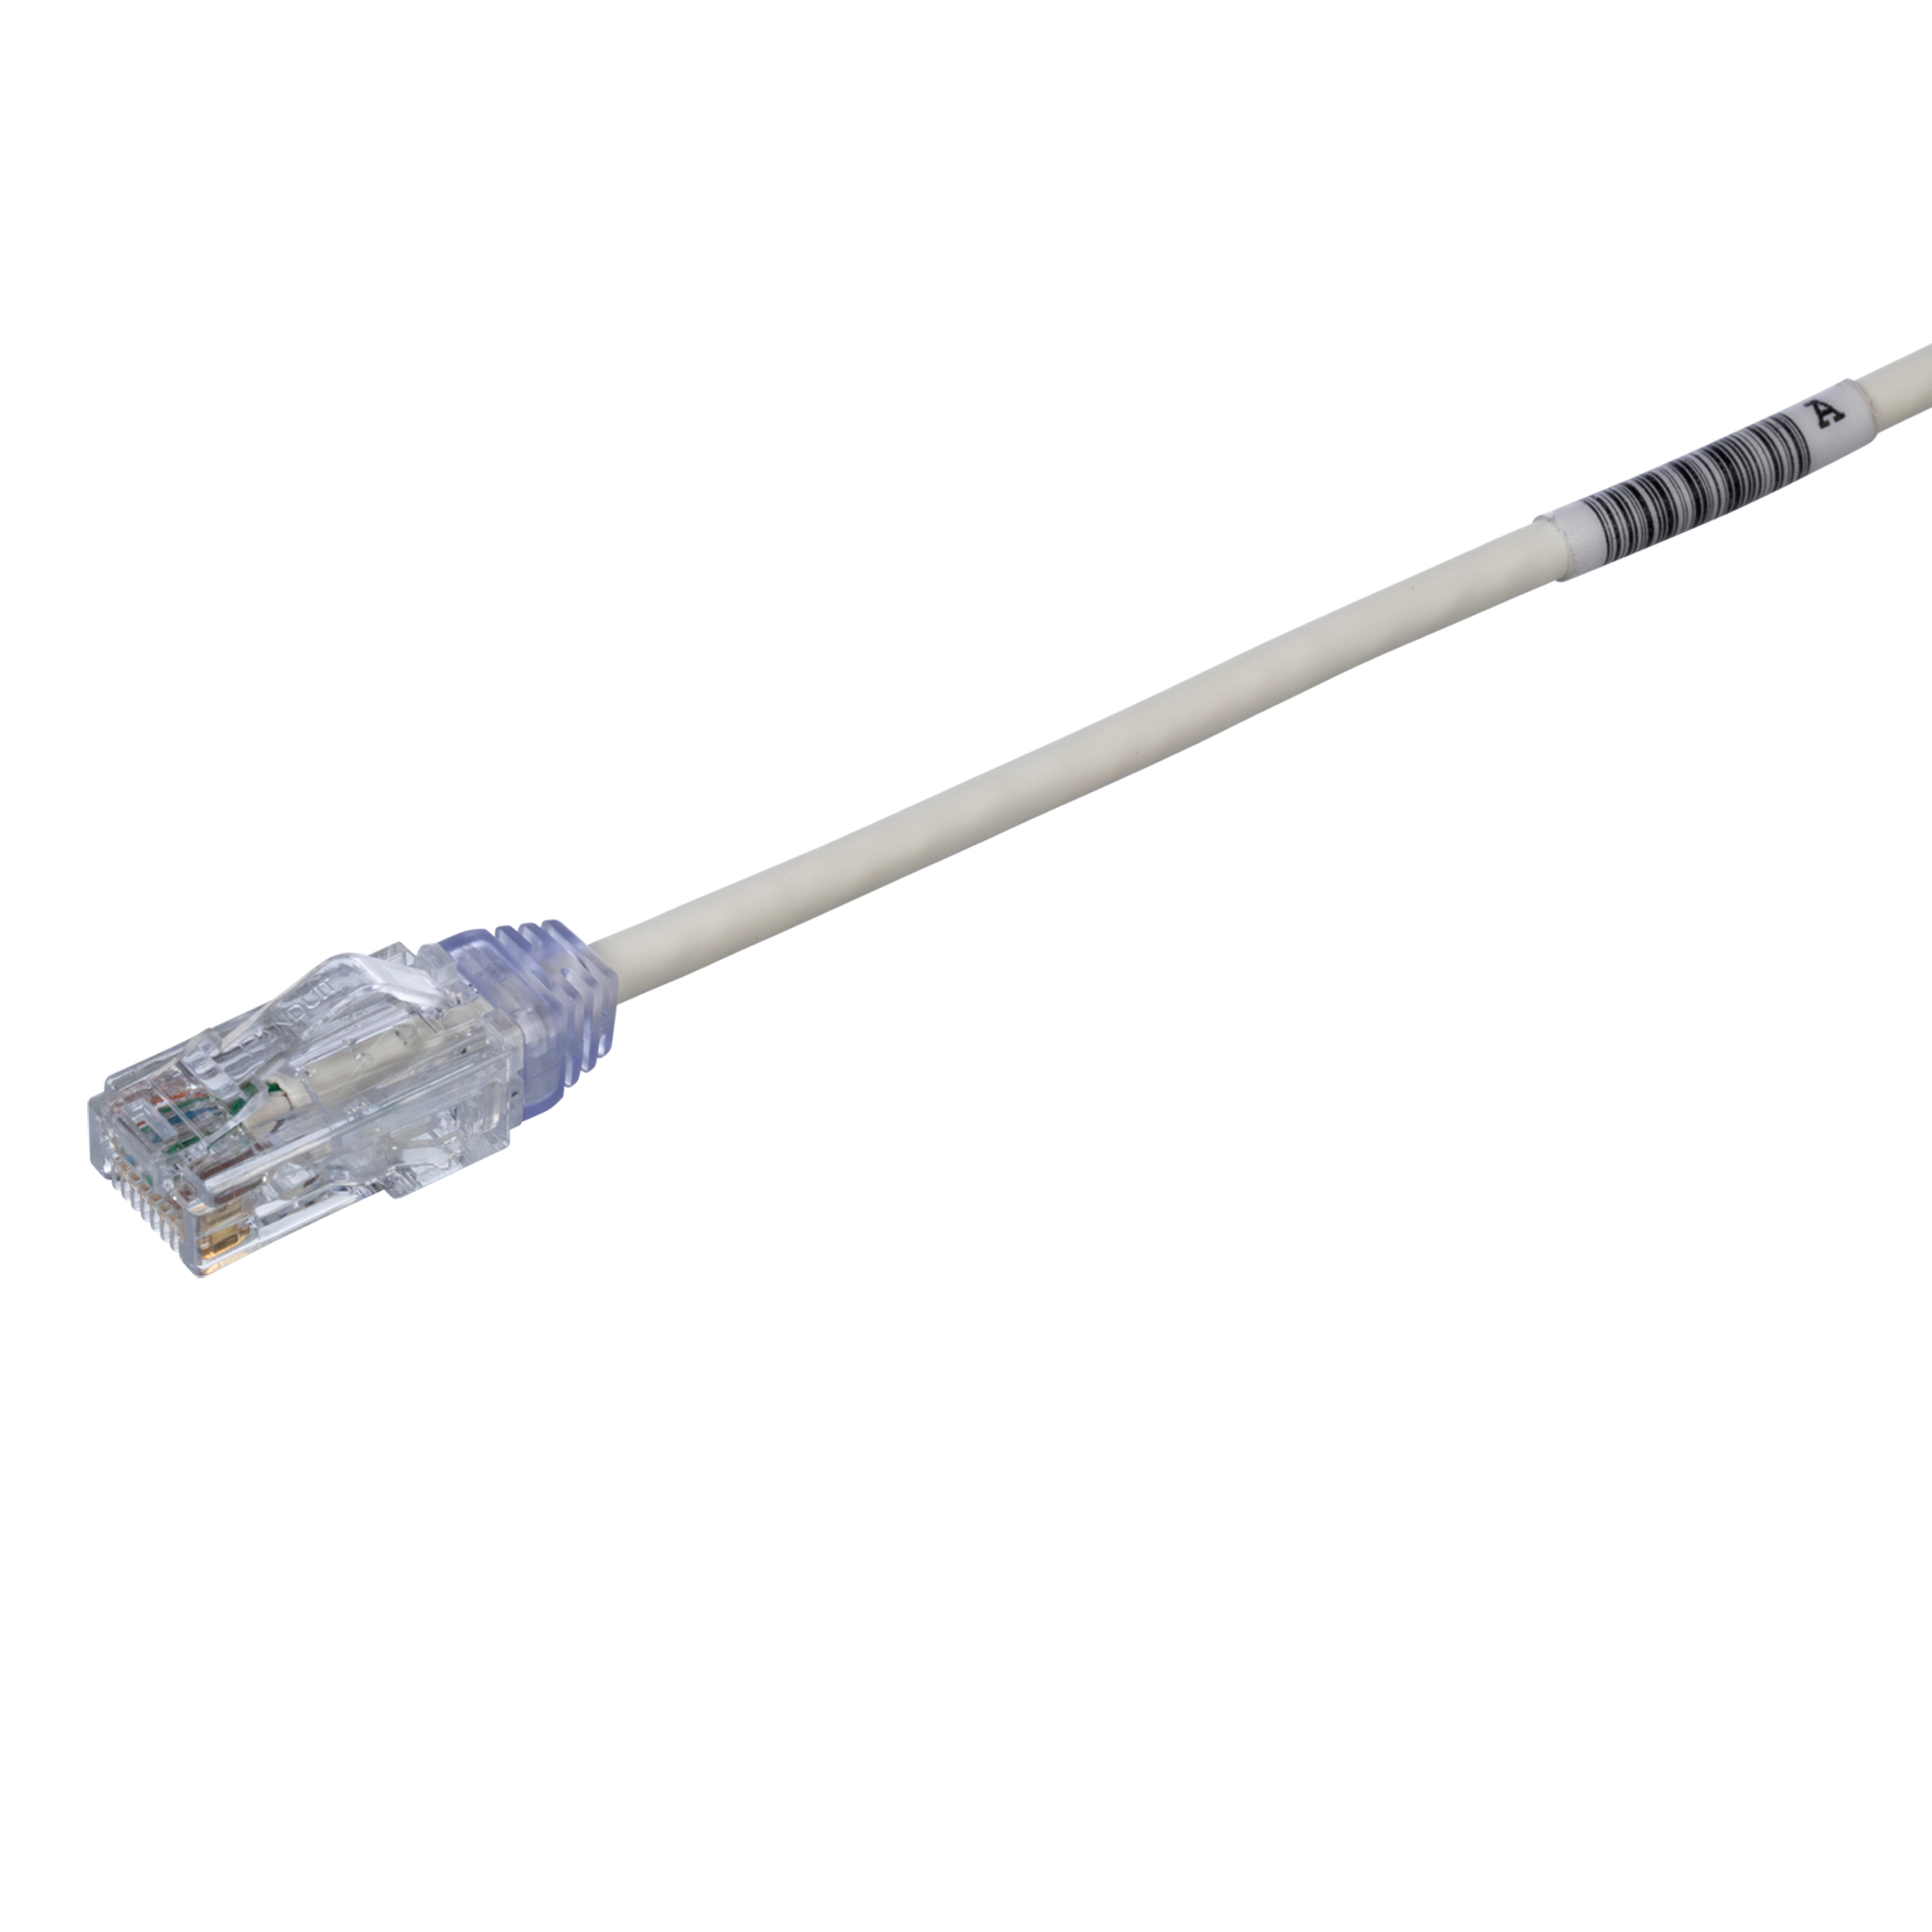 3FT, Grey PANDUIT UTP28SP 28 AWG Plug to Plug Cat6 CM/LSZH SD UTP Copper Patch Cord Pack of10